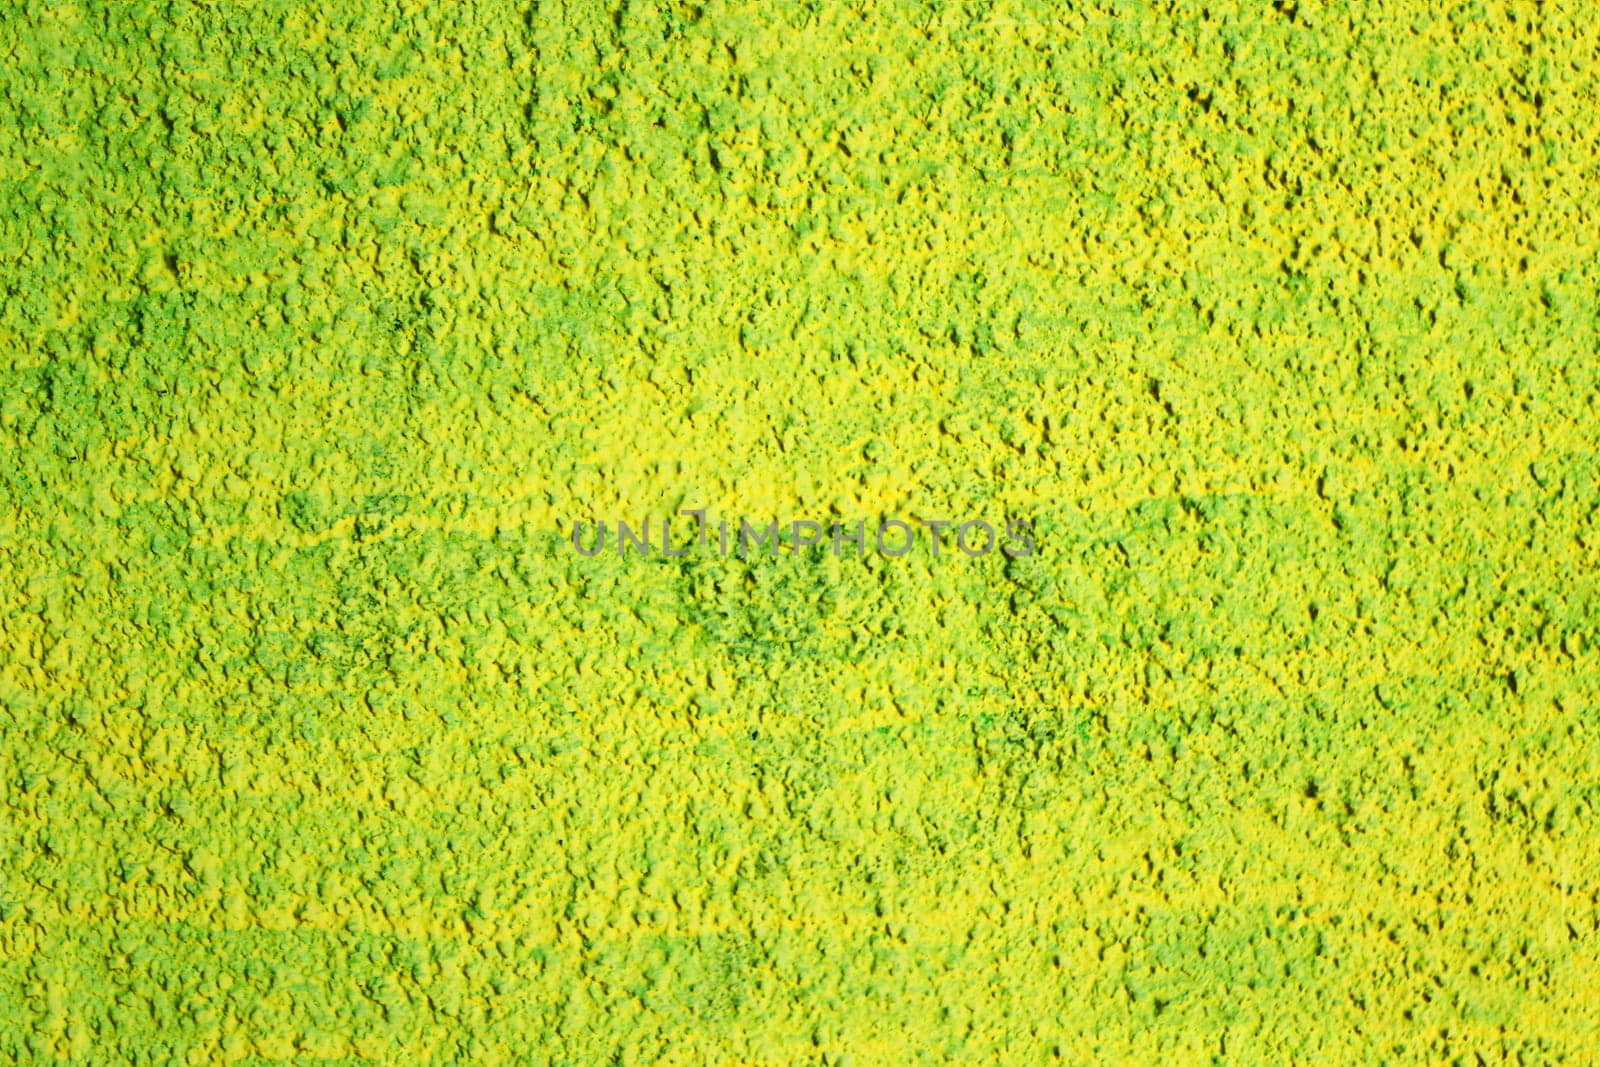 Texture of a wall covered with yellow and green paint, damaged by time. Rough surface of an old painted concrete wall.